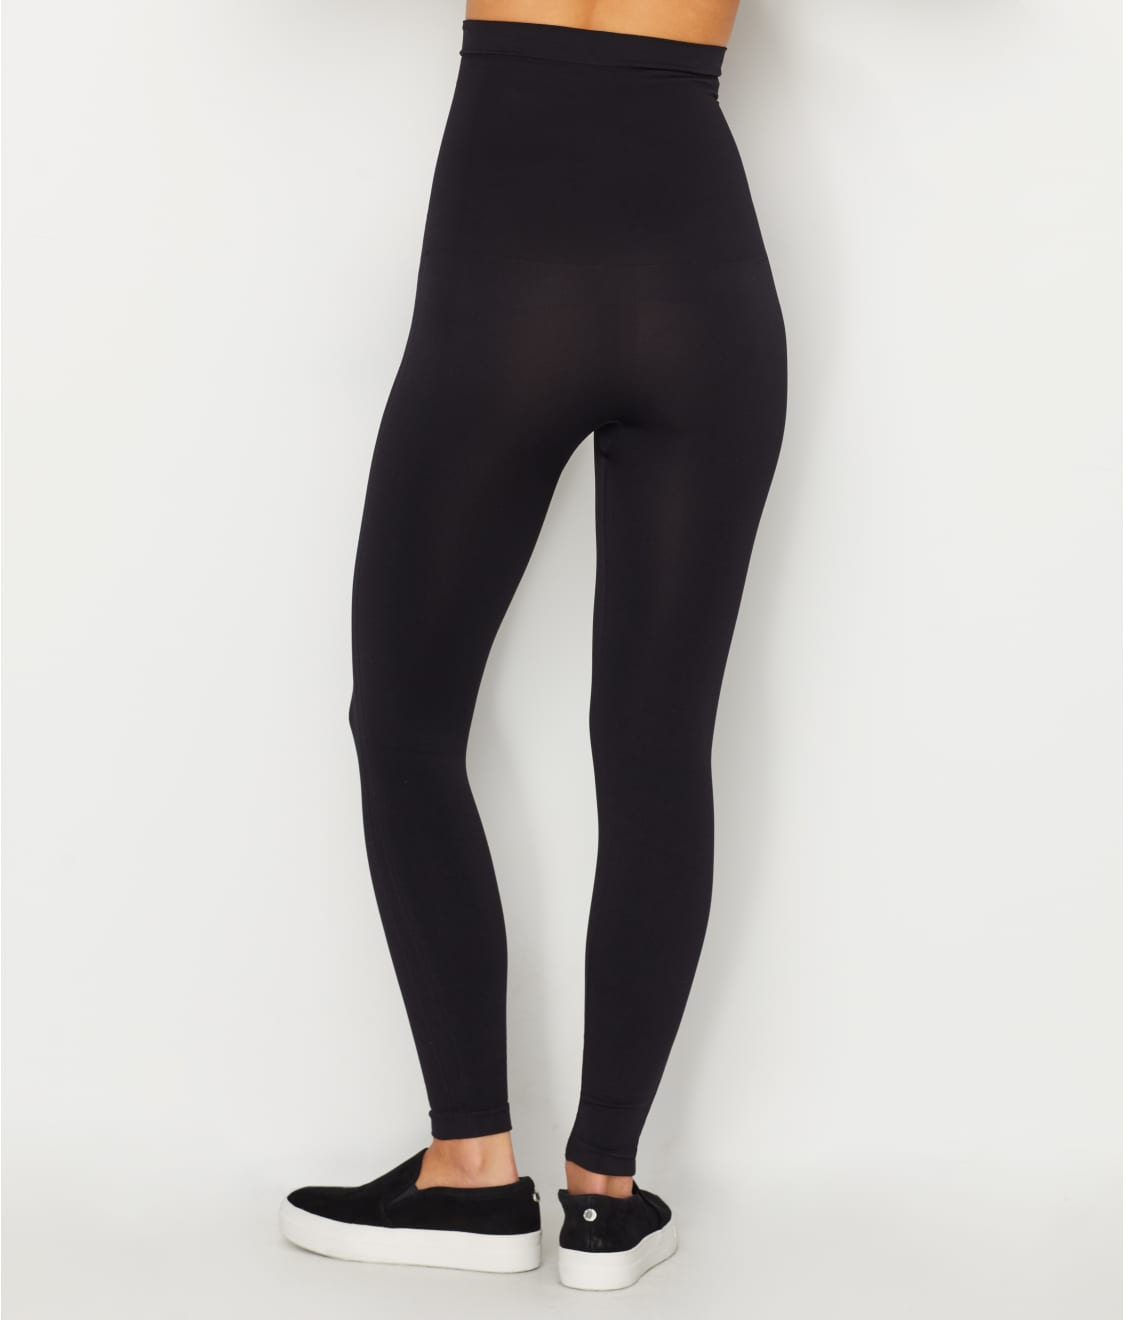 Spanx Look At Me Now High Waisted Leggings Review